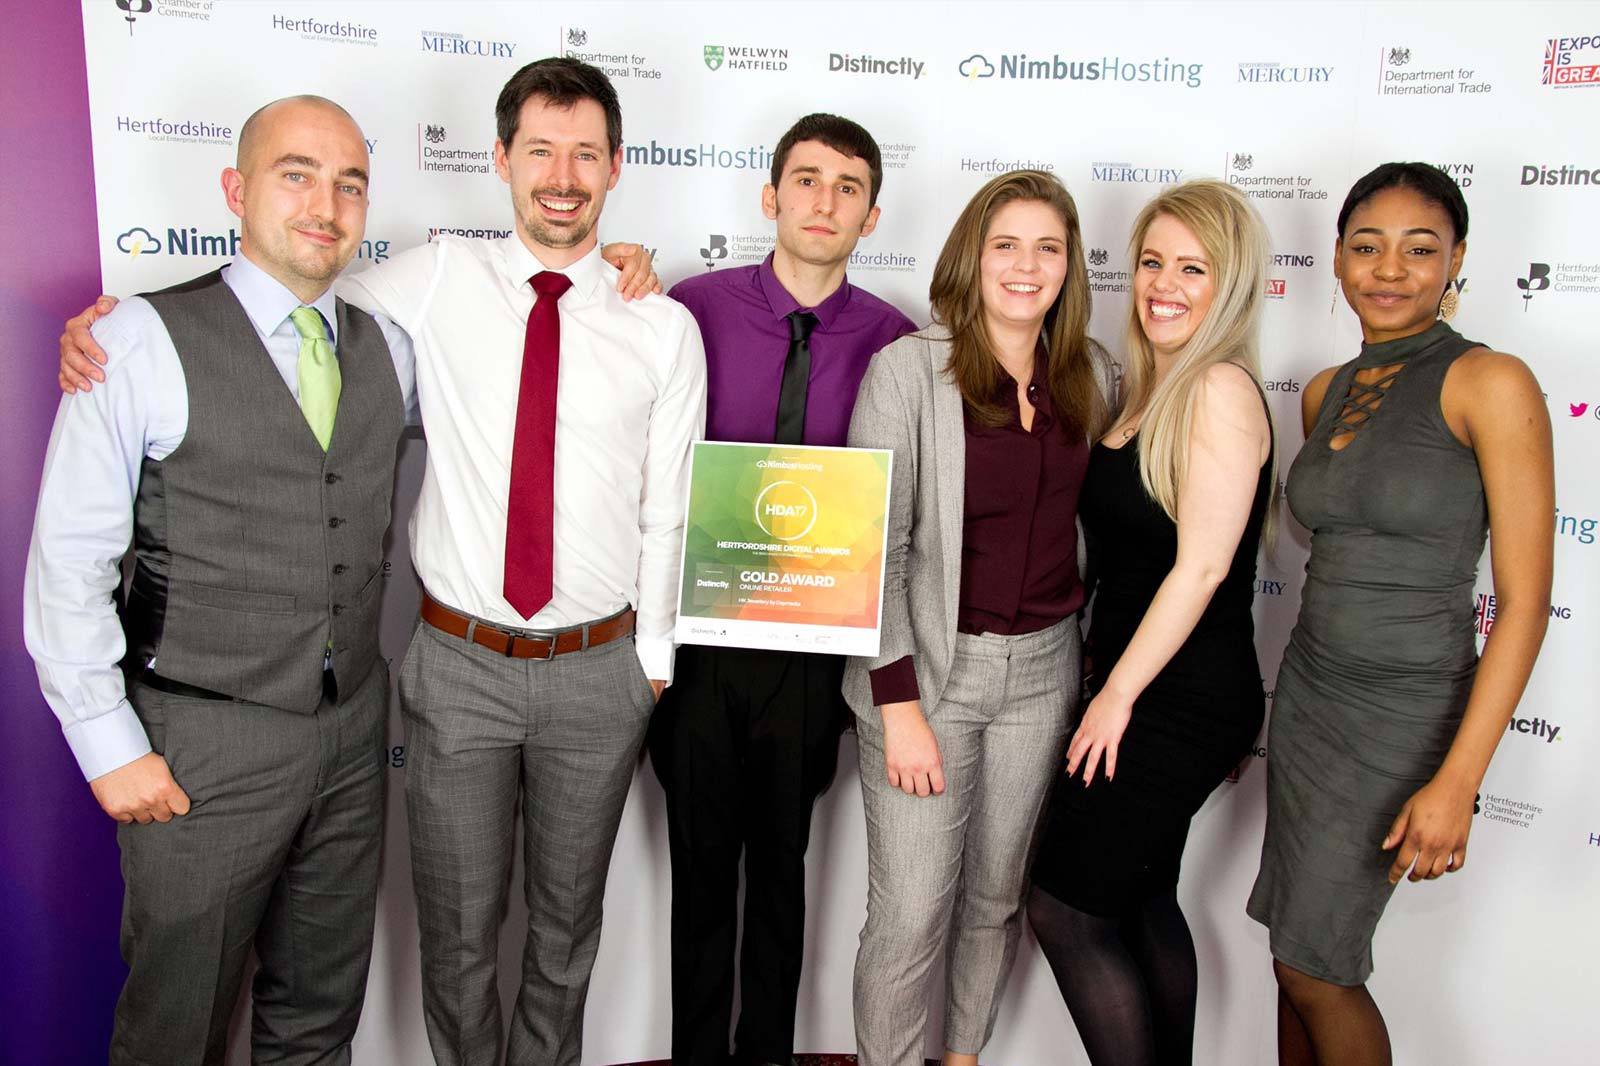 Photo of the Daymedia team at the Herts Digital Awards, holding the gold award plaque